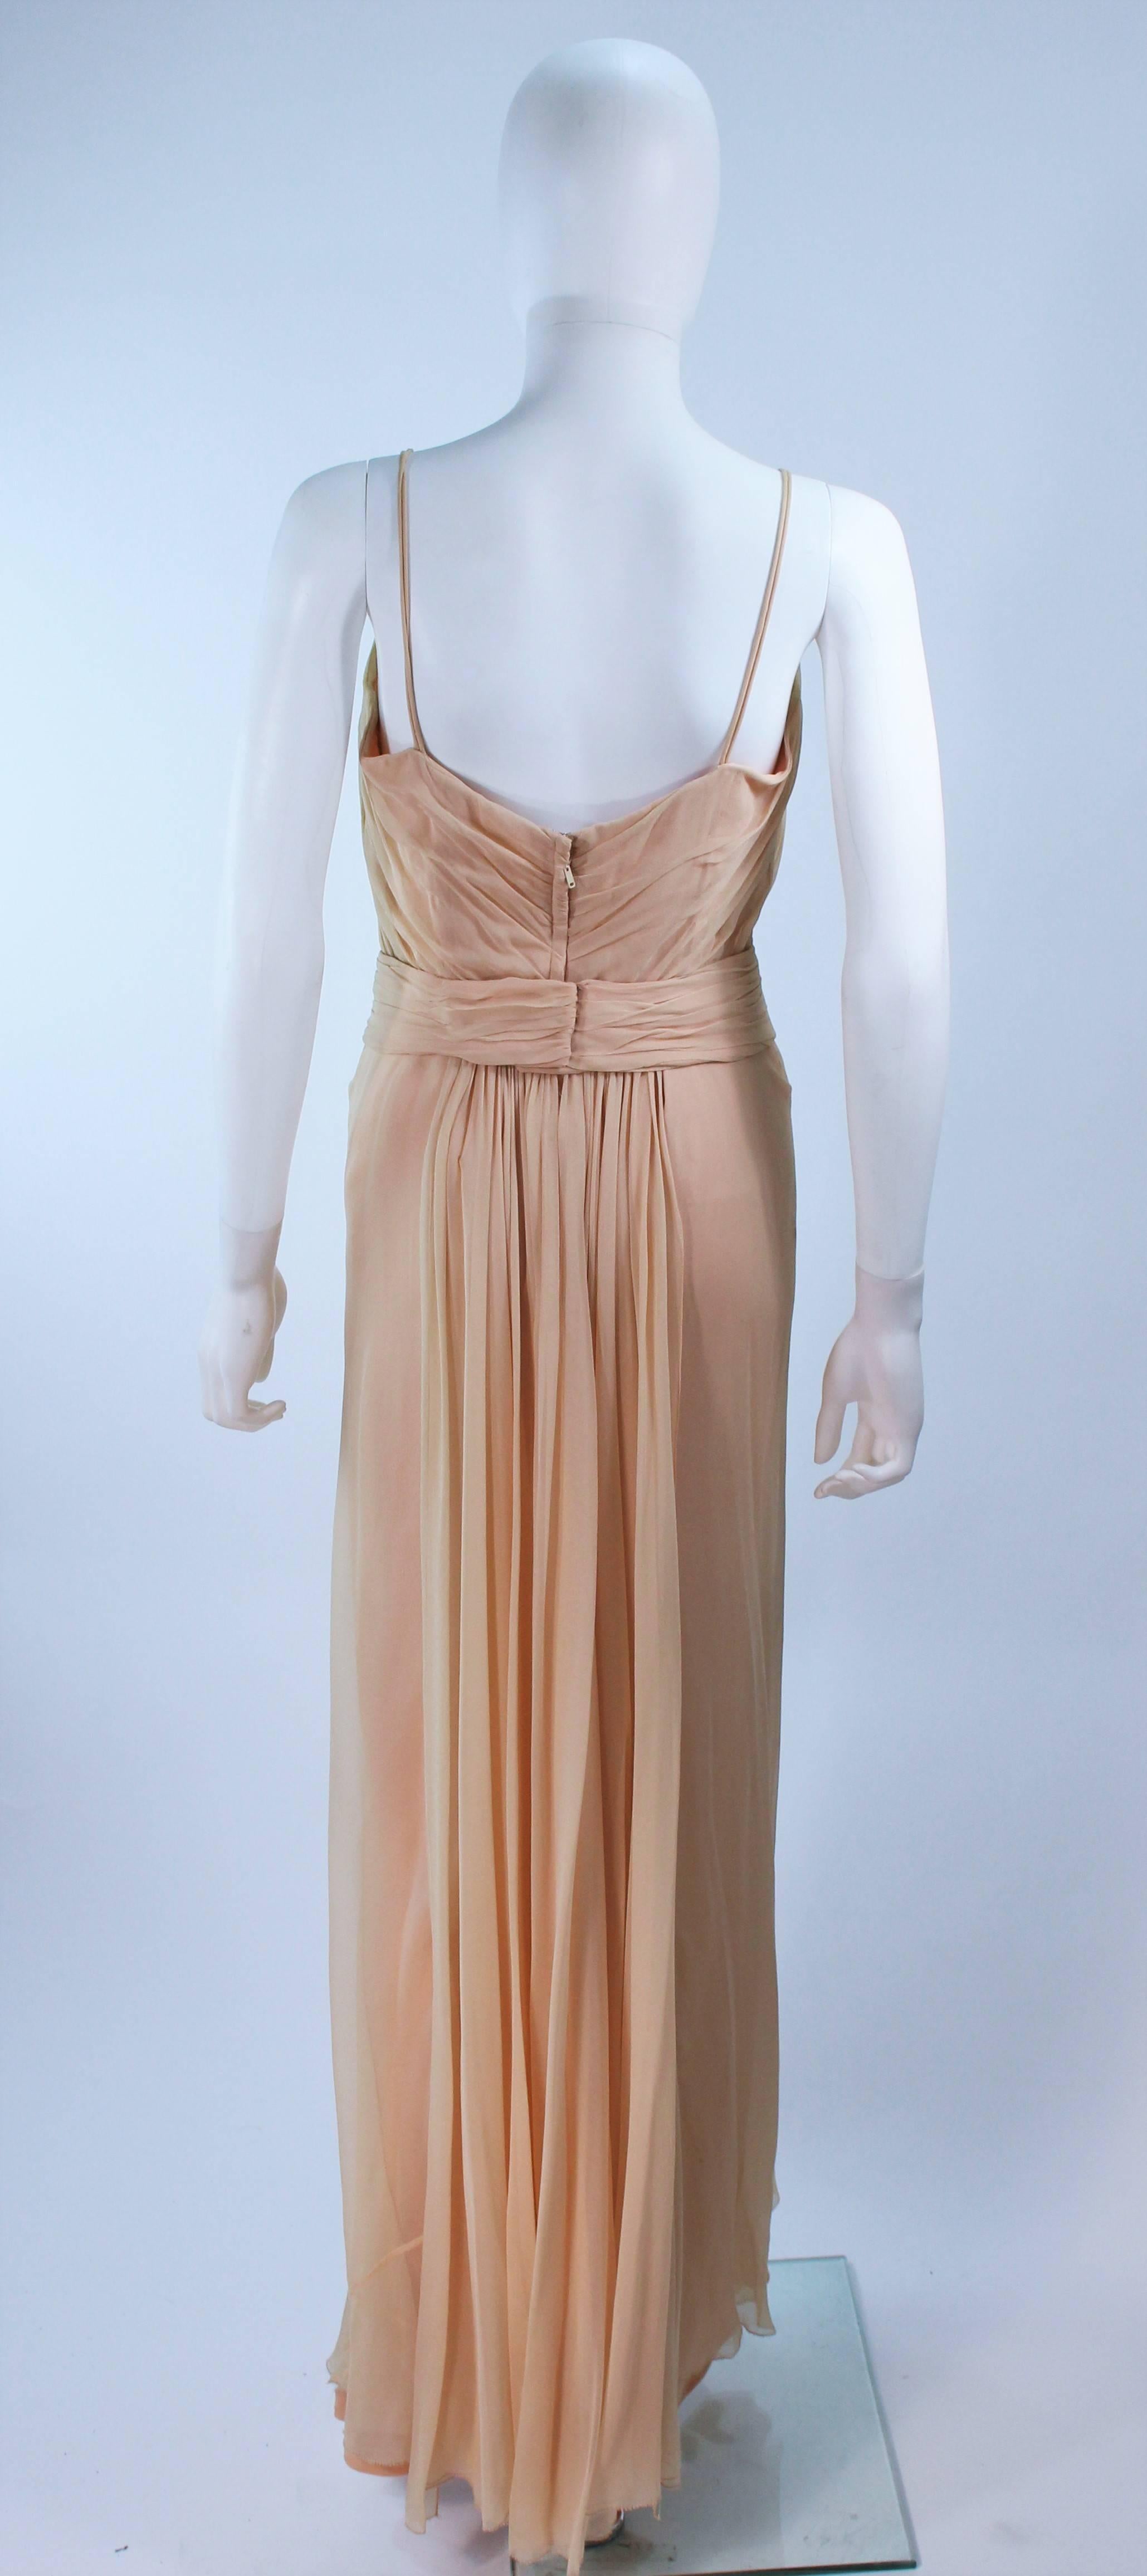 CEIL CHAPMAN Nude Chiffon Draped Gown Size 2 4 For Sale 4